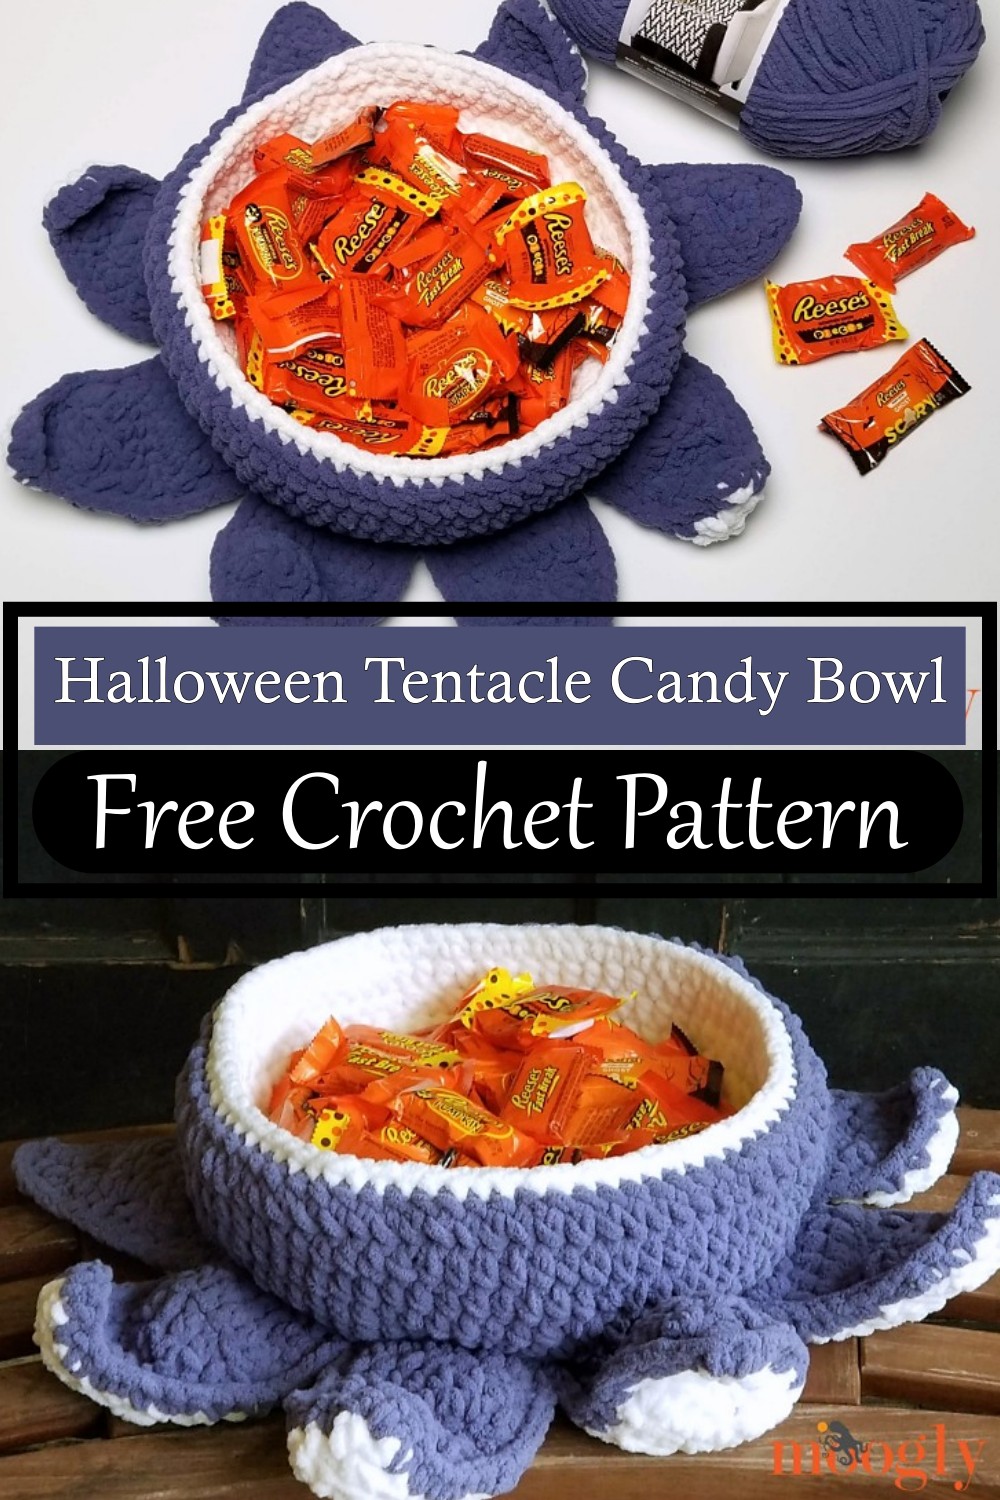 Halloween Tentacle Candy Bowl